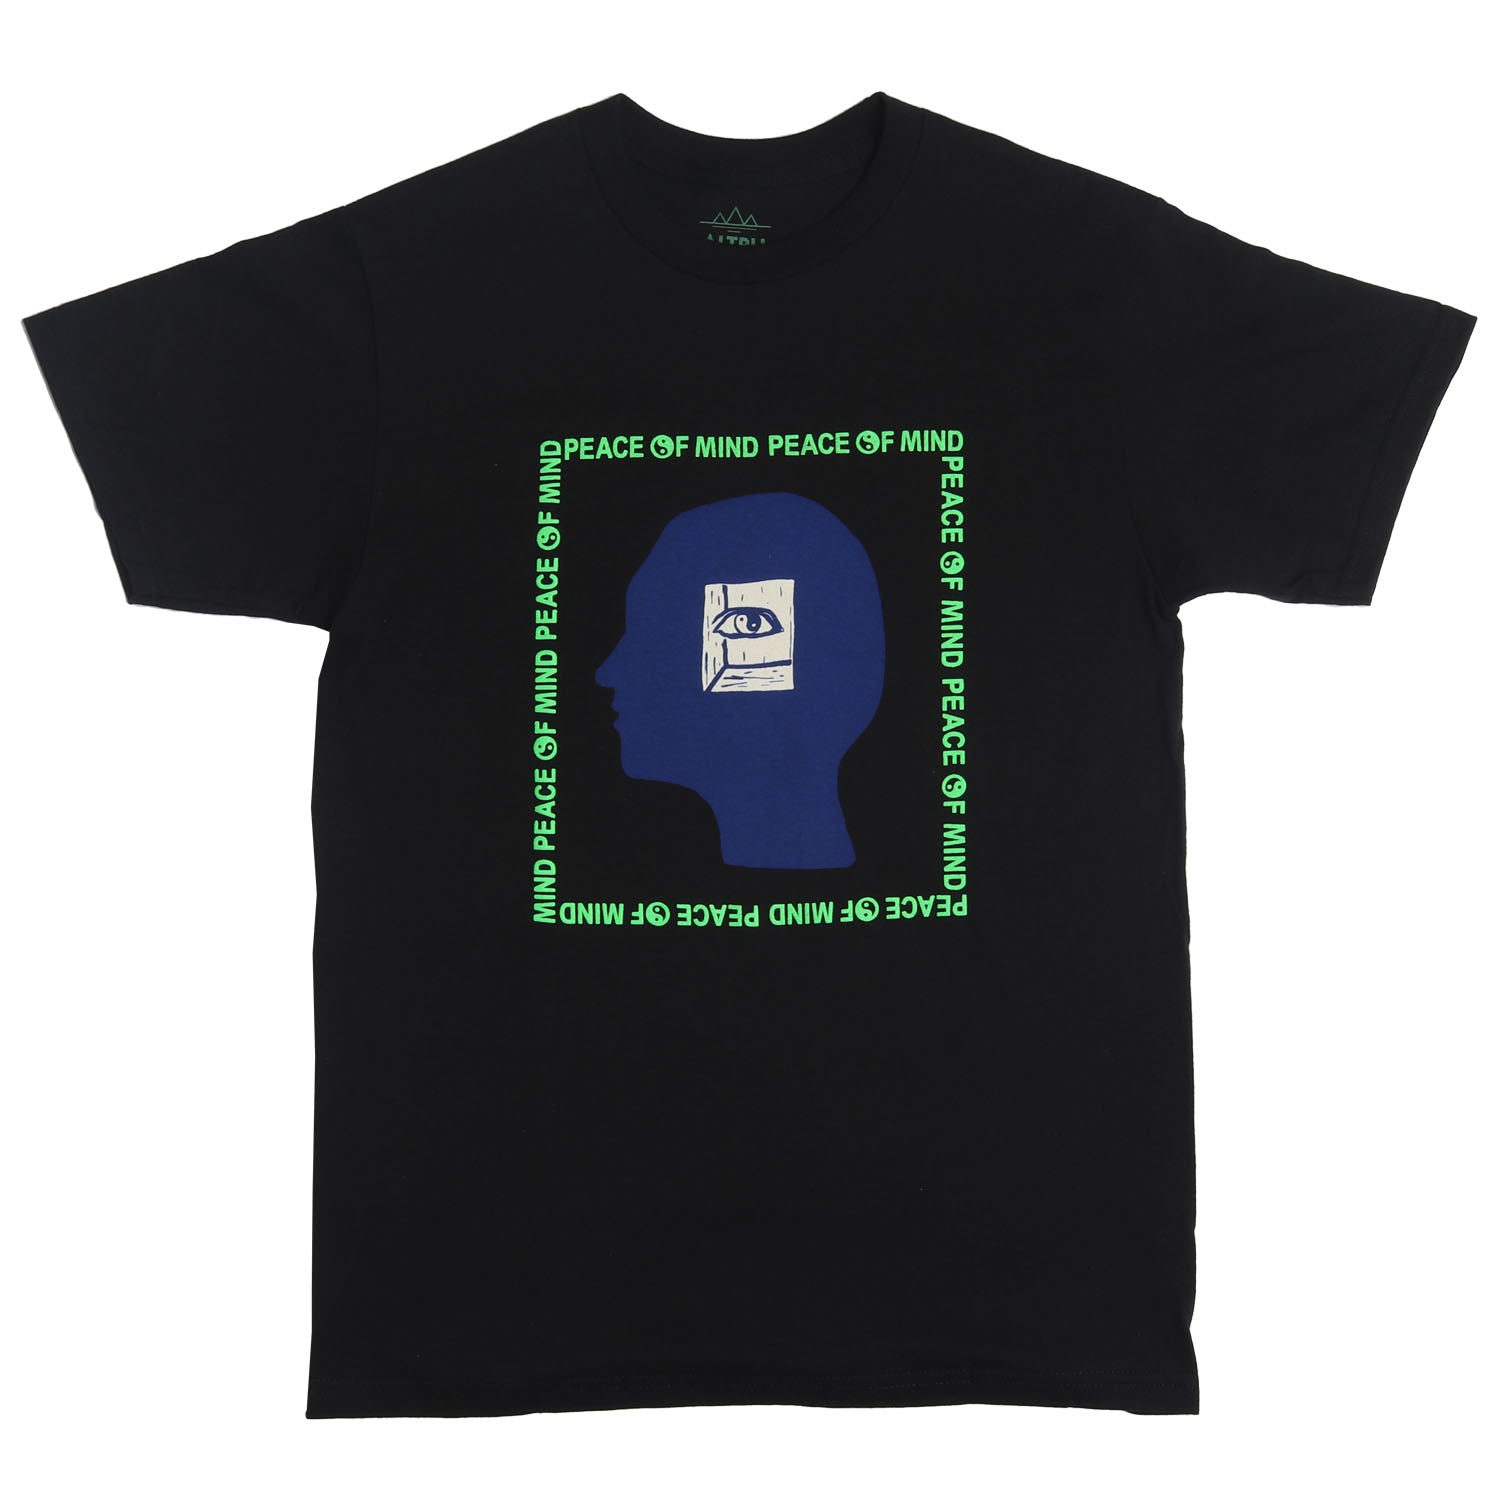 Peace of Mind text on black graphic tee. Yin Yang symbols in green puff ink. Graphic of a head with an inner eye over the head silhouette. graphic. Short sleeve black tee with green puff ink, blue head and white inner eye. Front of tee. Altru Apparel.